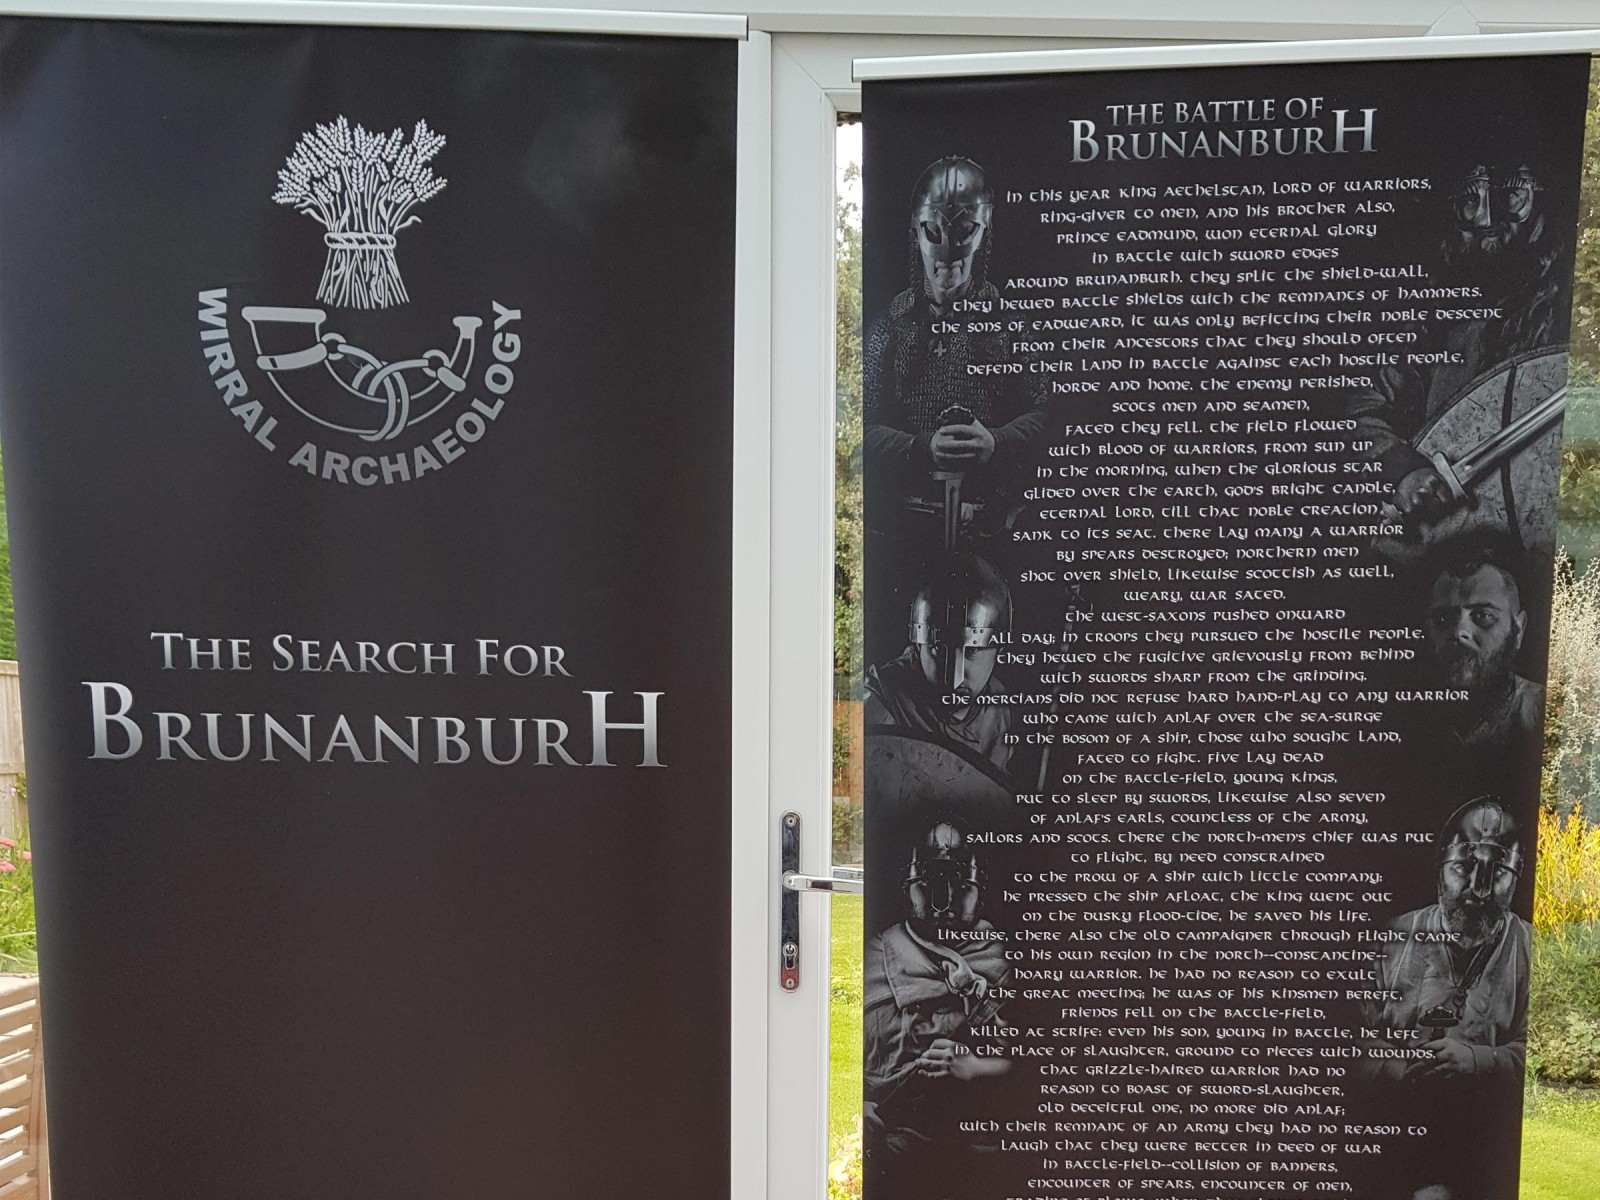 Wirral Archaeology banner relating  the ‘battle of Brunanburh’ poem.